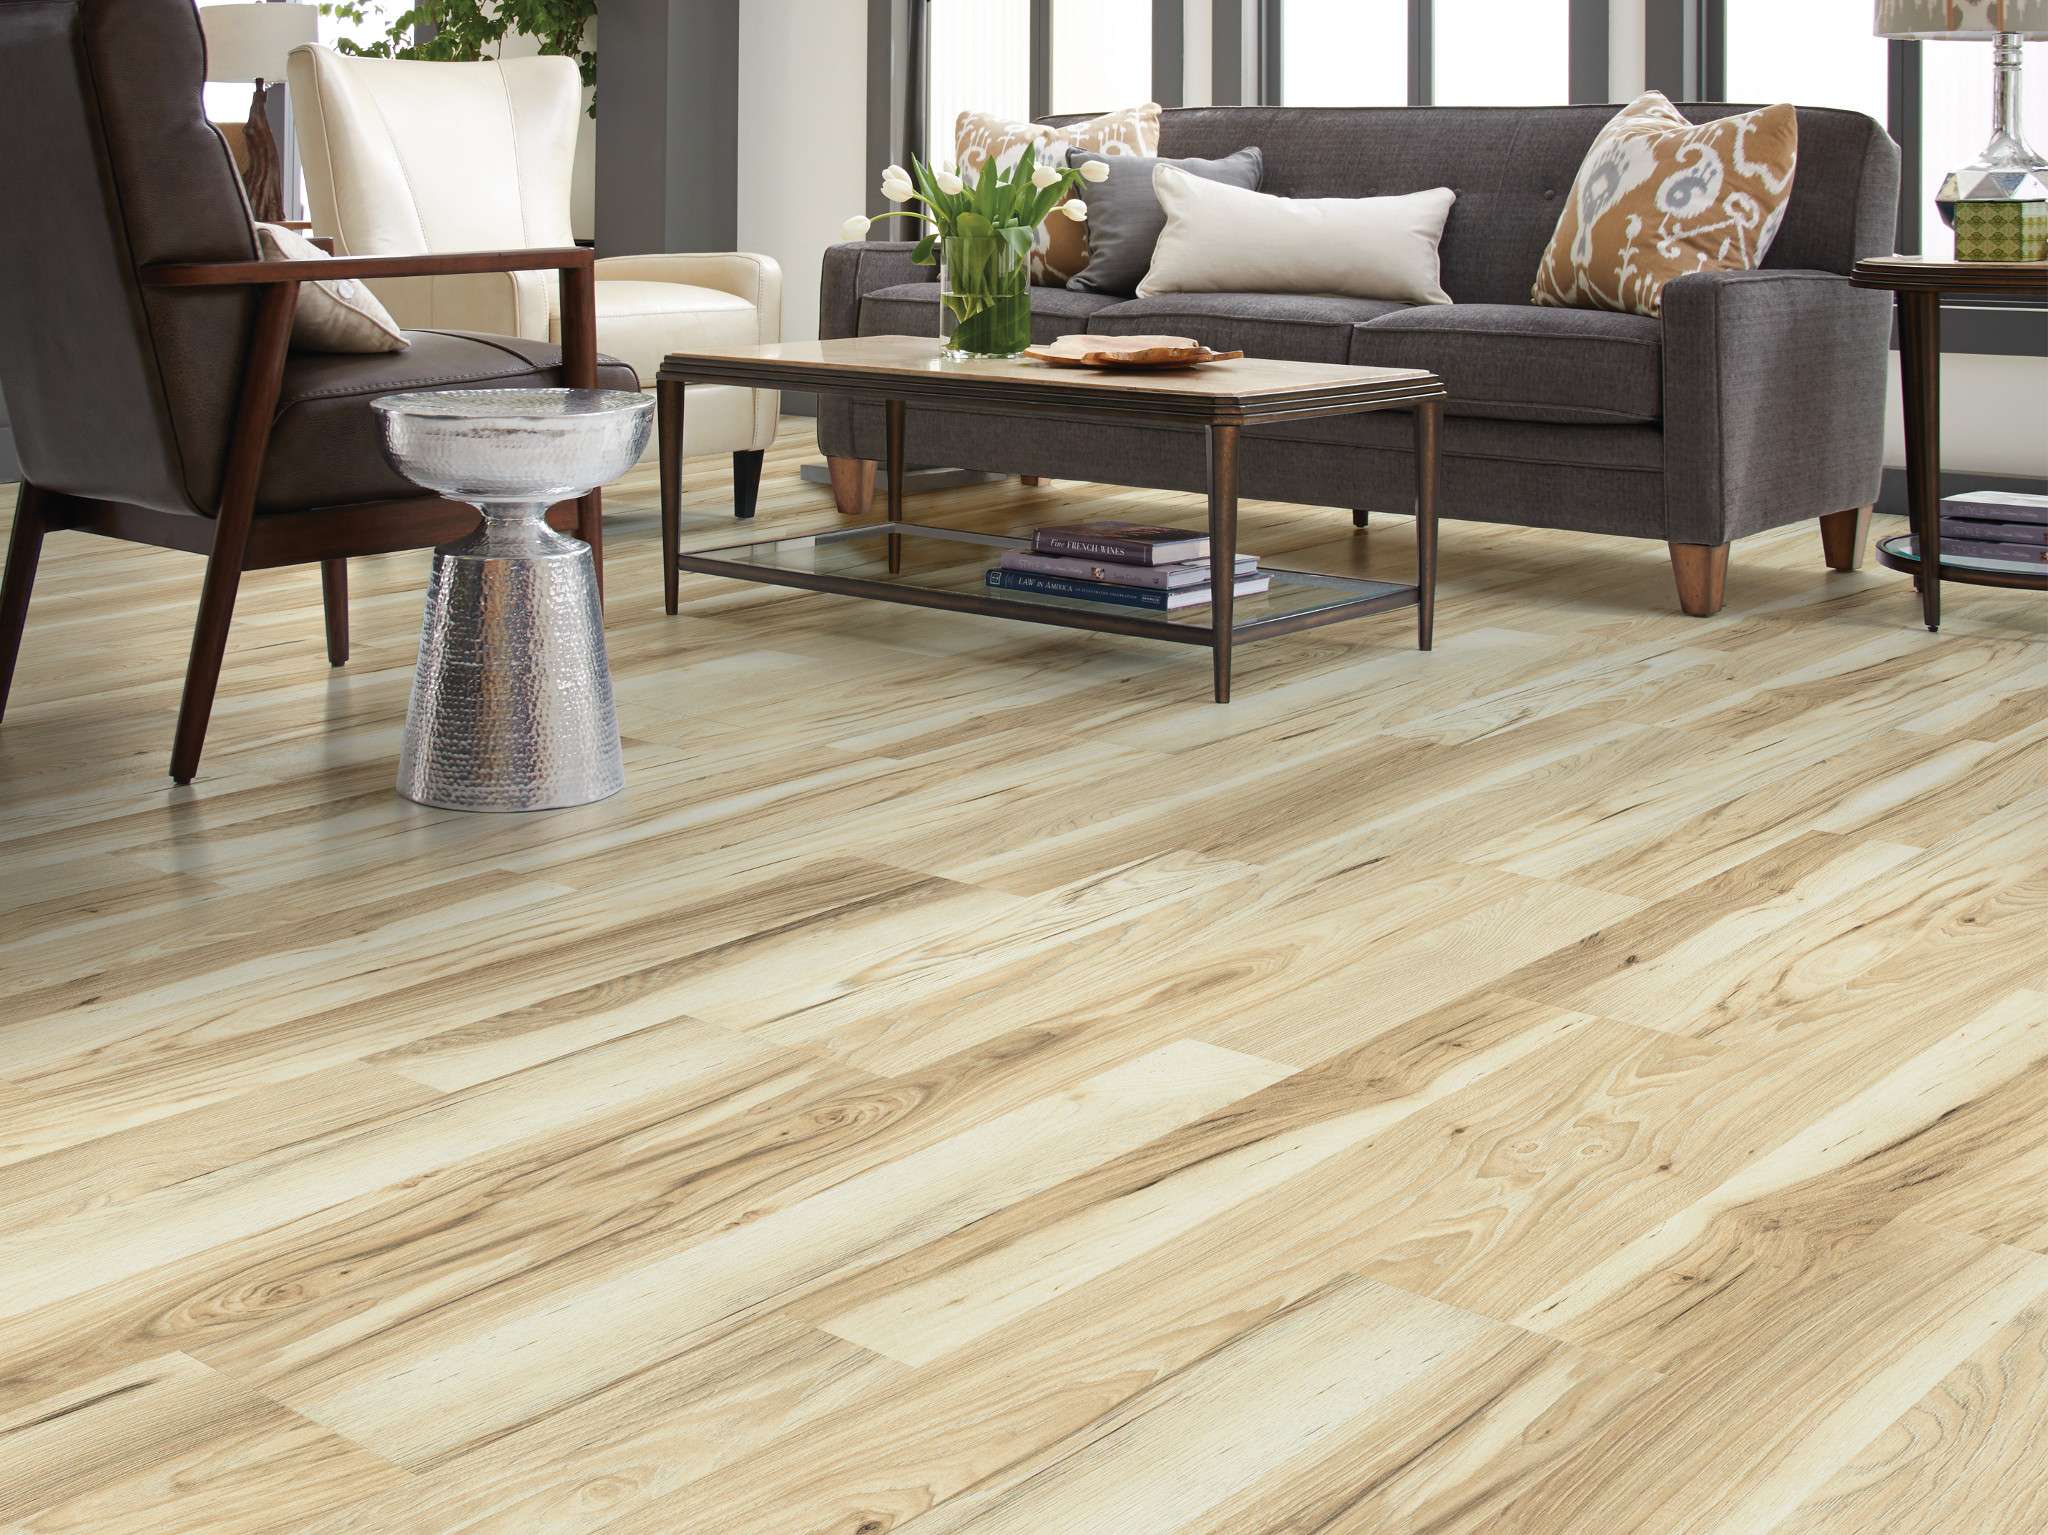 Classic Designs Sl110 Starlight Hckry, Shaw Classic Collection Laminate Flooring